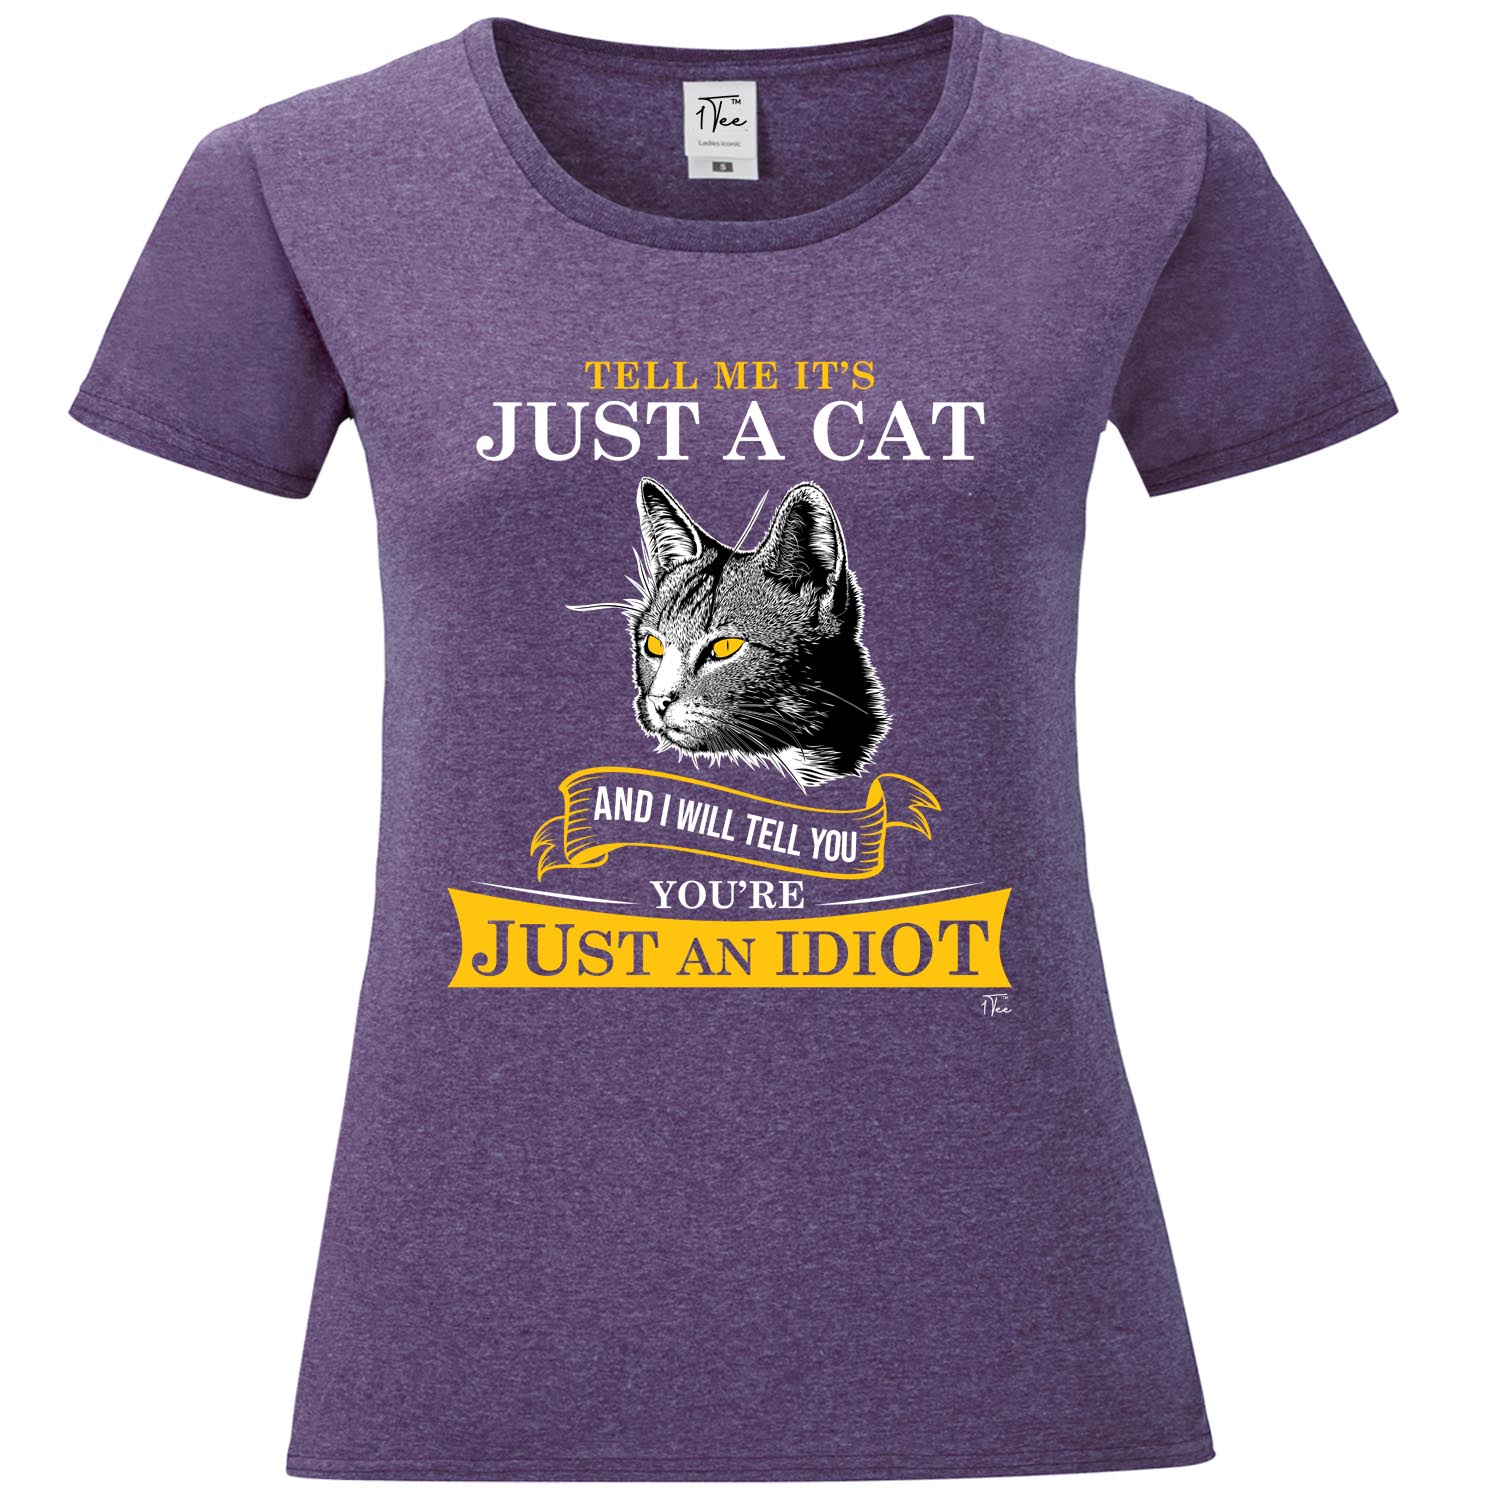 Ladies Tell Me Its Just A Cat And I'll tell You You're An Idiot Funny T Shirt 